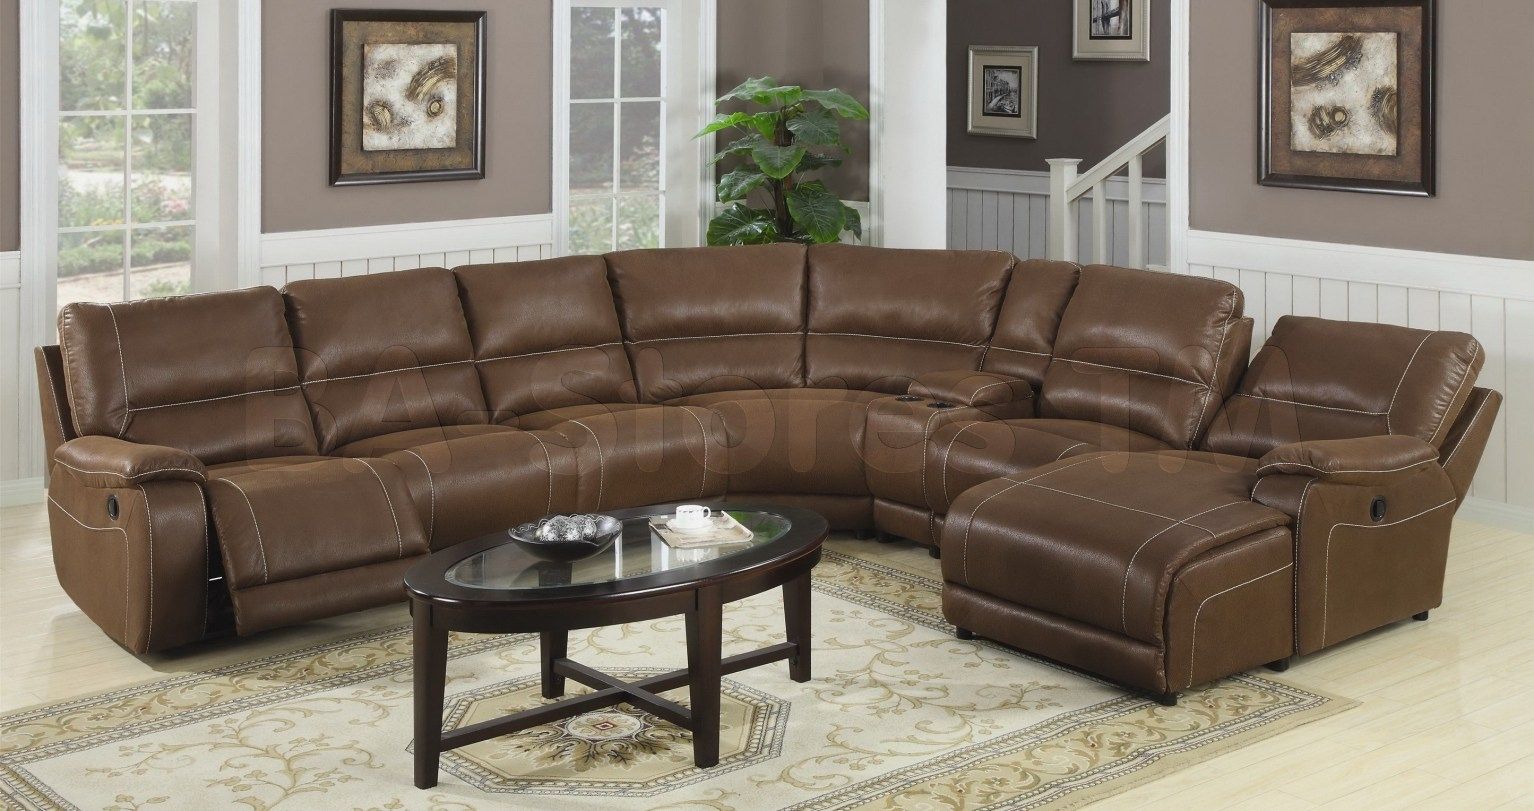 Furniture : Cool Sofas For Sale Excellent Design Ideas 19 Bedroom For Valdosta Ga Sectional Sofas (View 7 of 10)